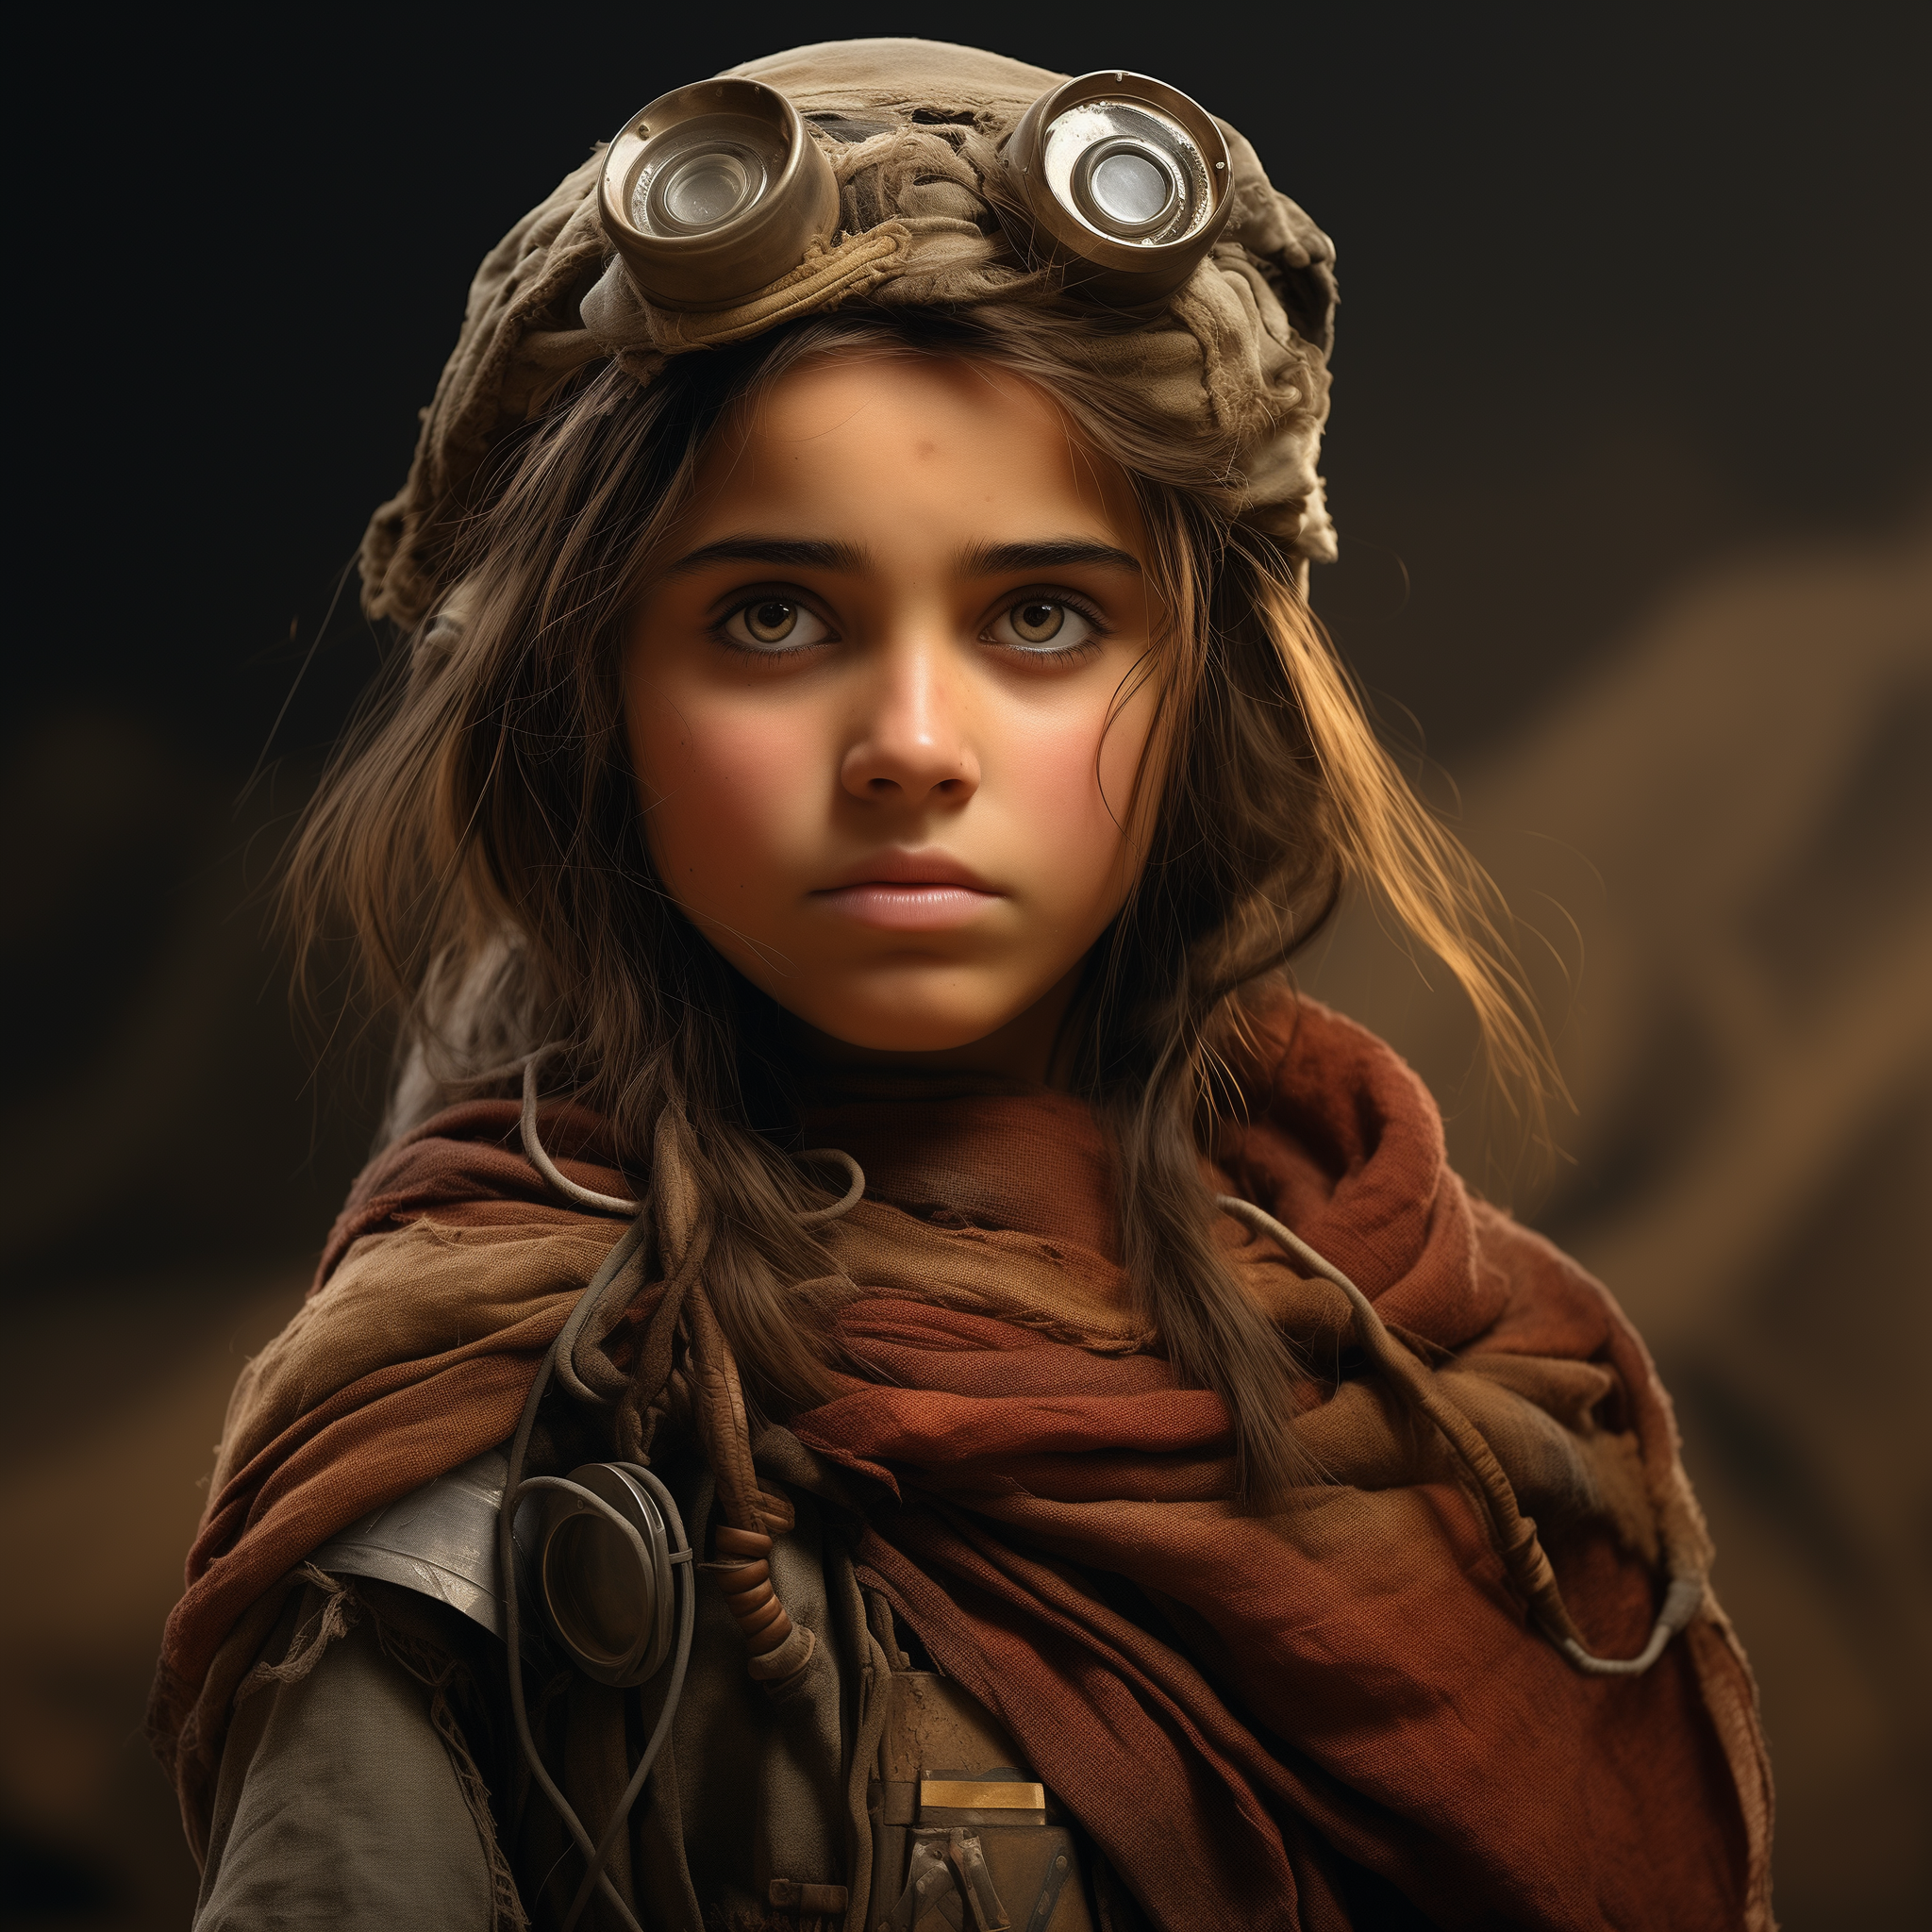 orestis_afghan_girl_photograph_steampunk_Transitional_4k_--v_5._59d39bbf-8078-496a-97eb-e4a93f5fe469.png